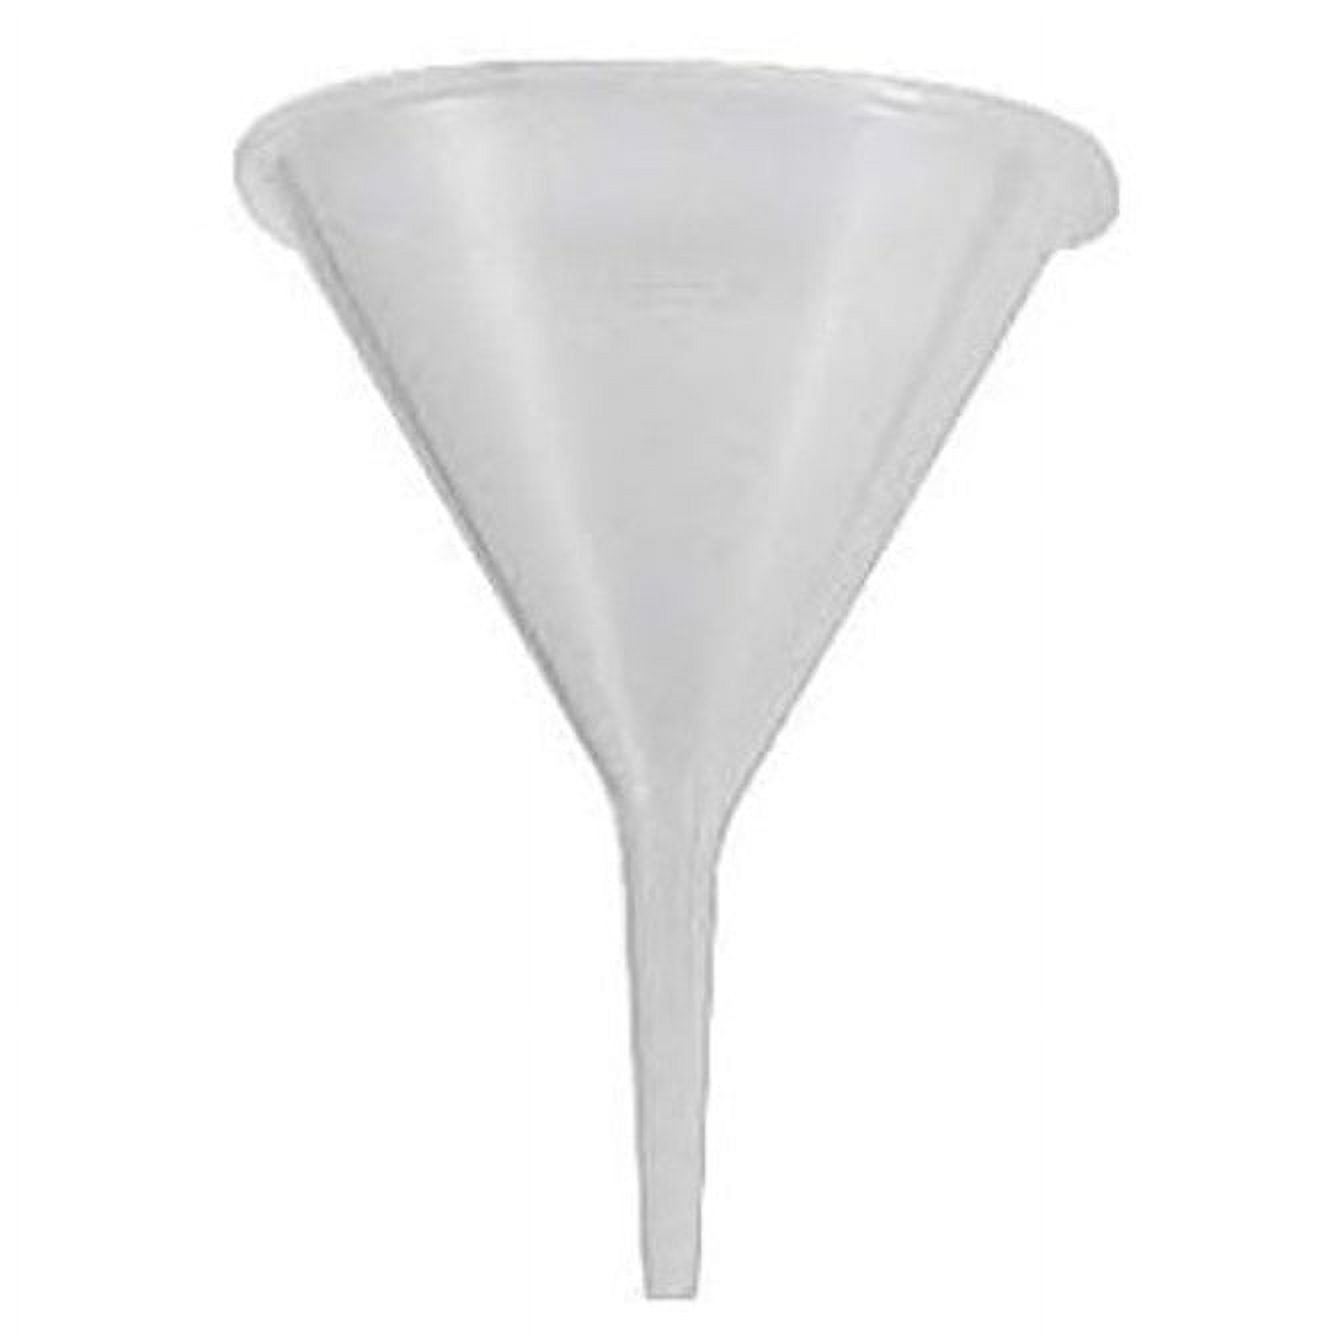 Hutzler Multi-Purpose Plastic Funnel Set with Mini-Funnel and Canning Funnel  (Set of 7) 3FUN-7 - The Home Depot